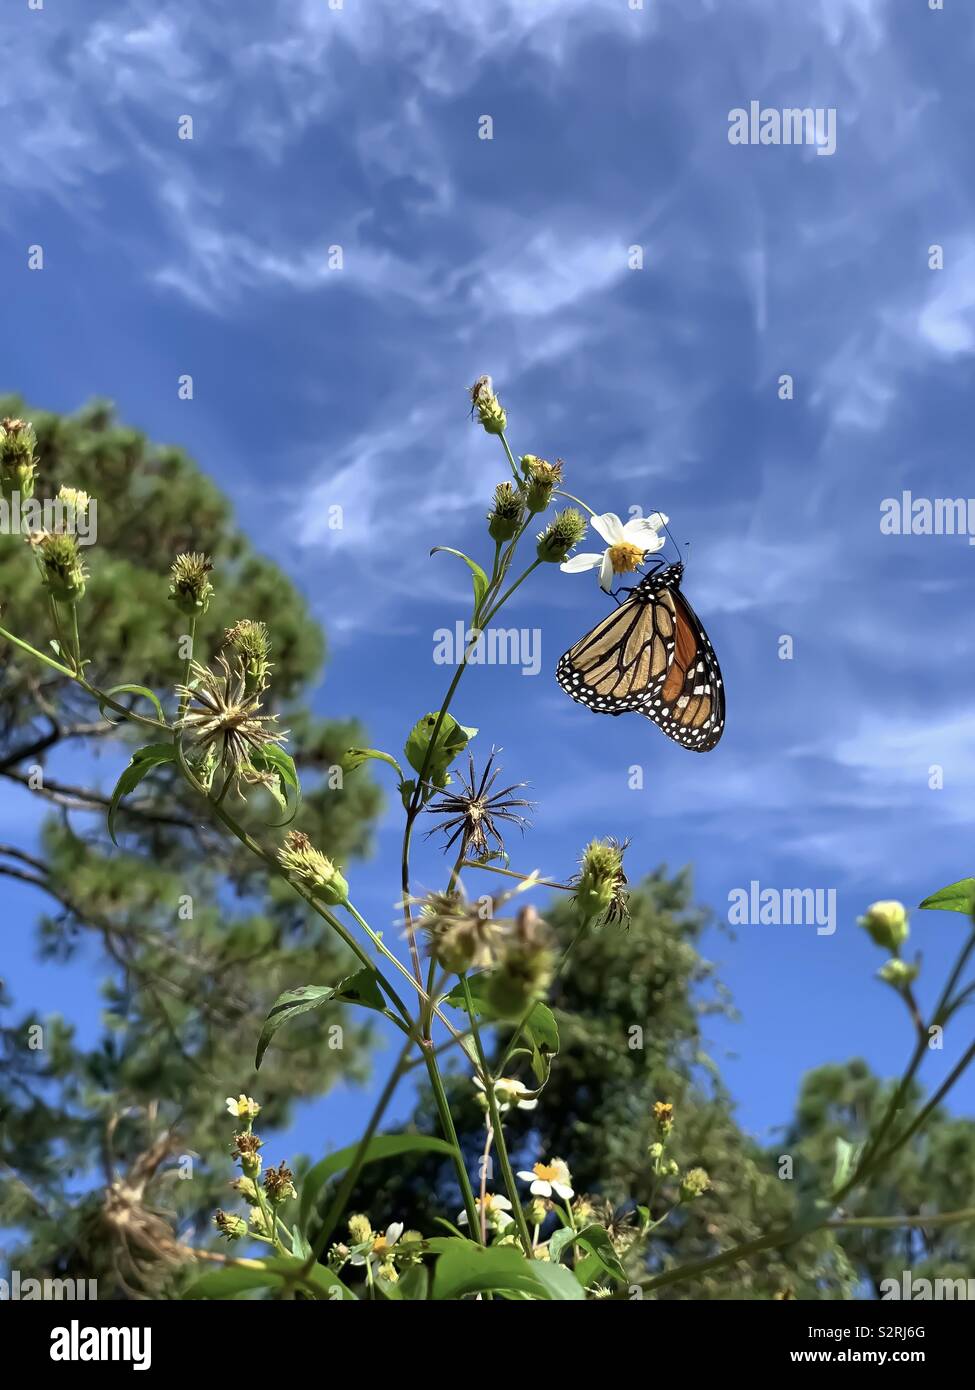 Monarch butterfly hanging on daisy plant with blue sky background Stock Photo